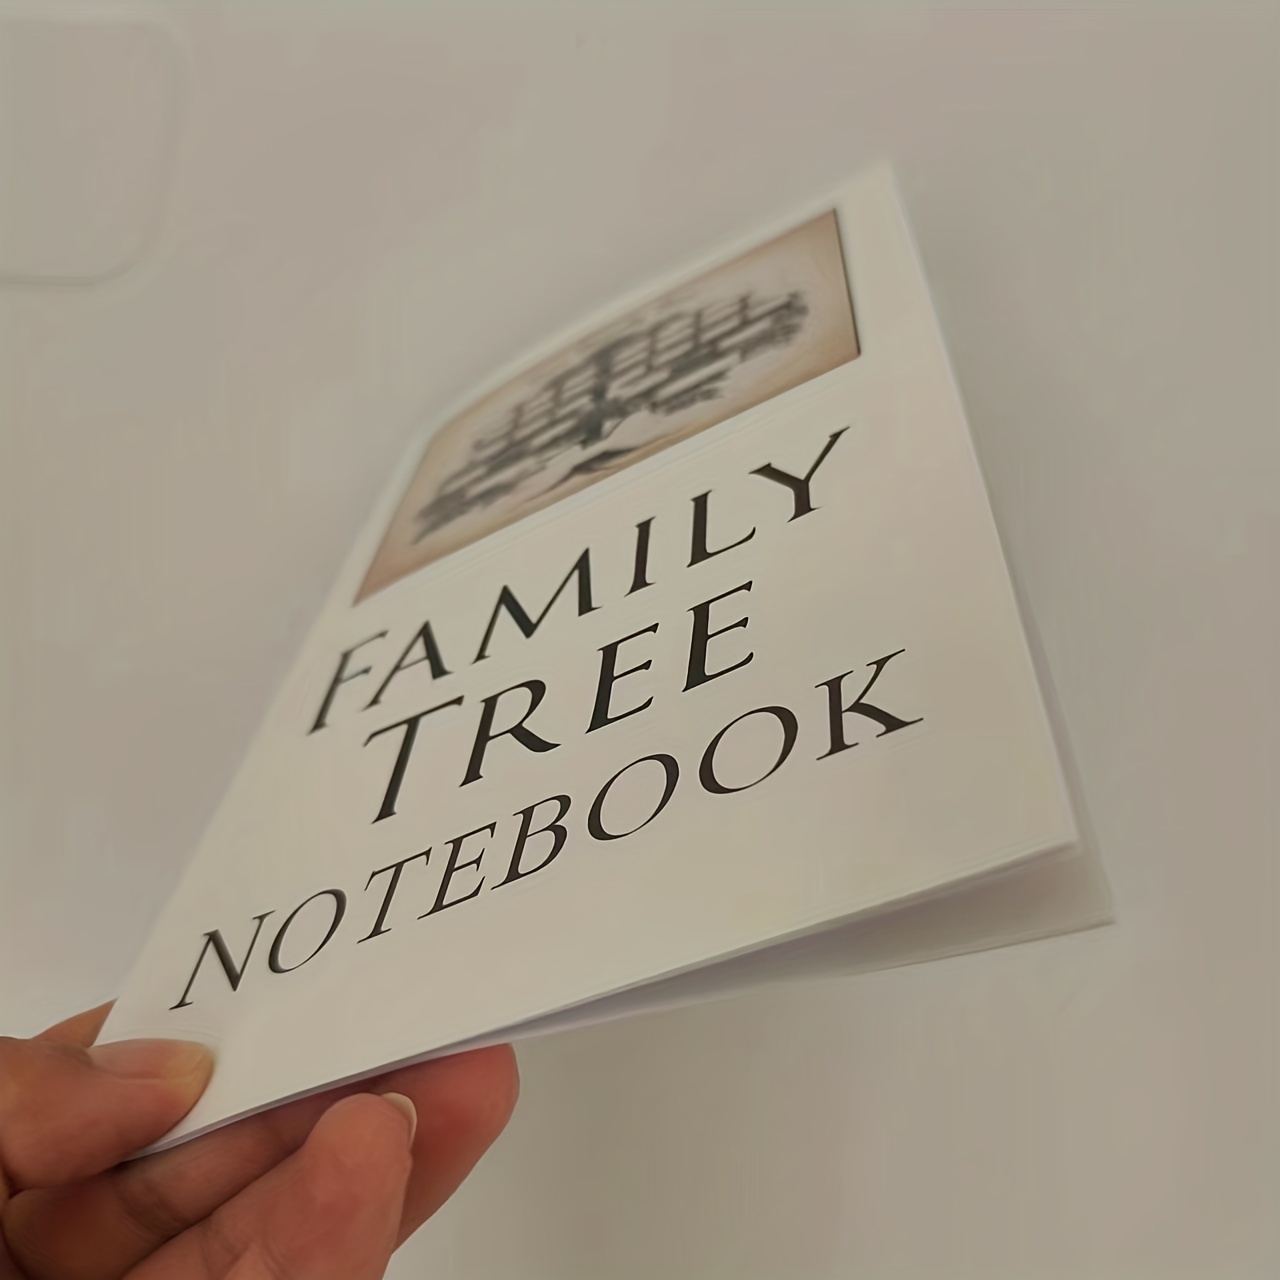 Family Tree Record Book 32 Pages Wide Lined, Family History